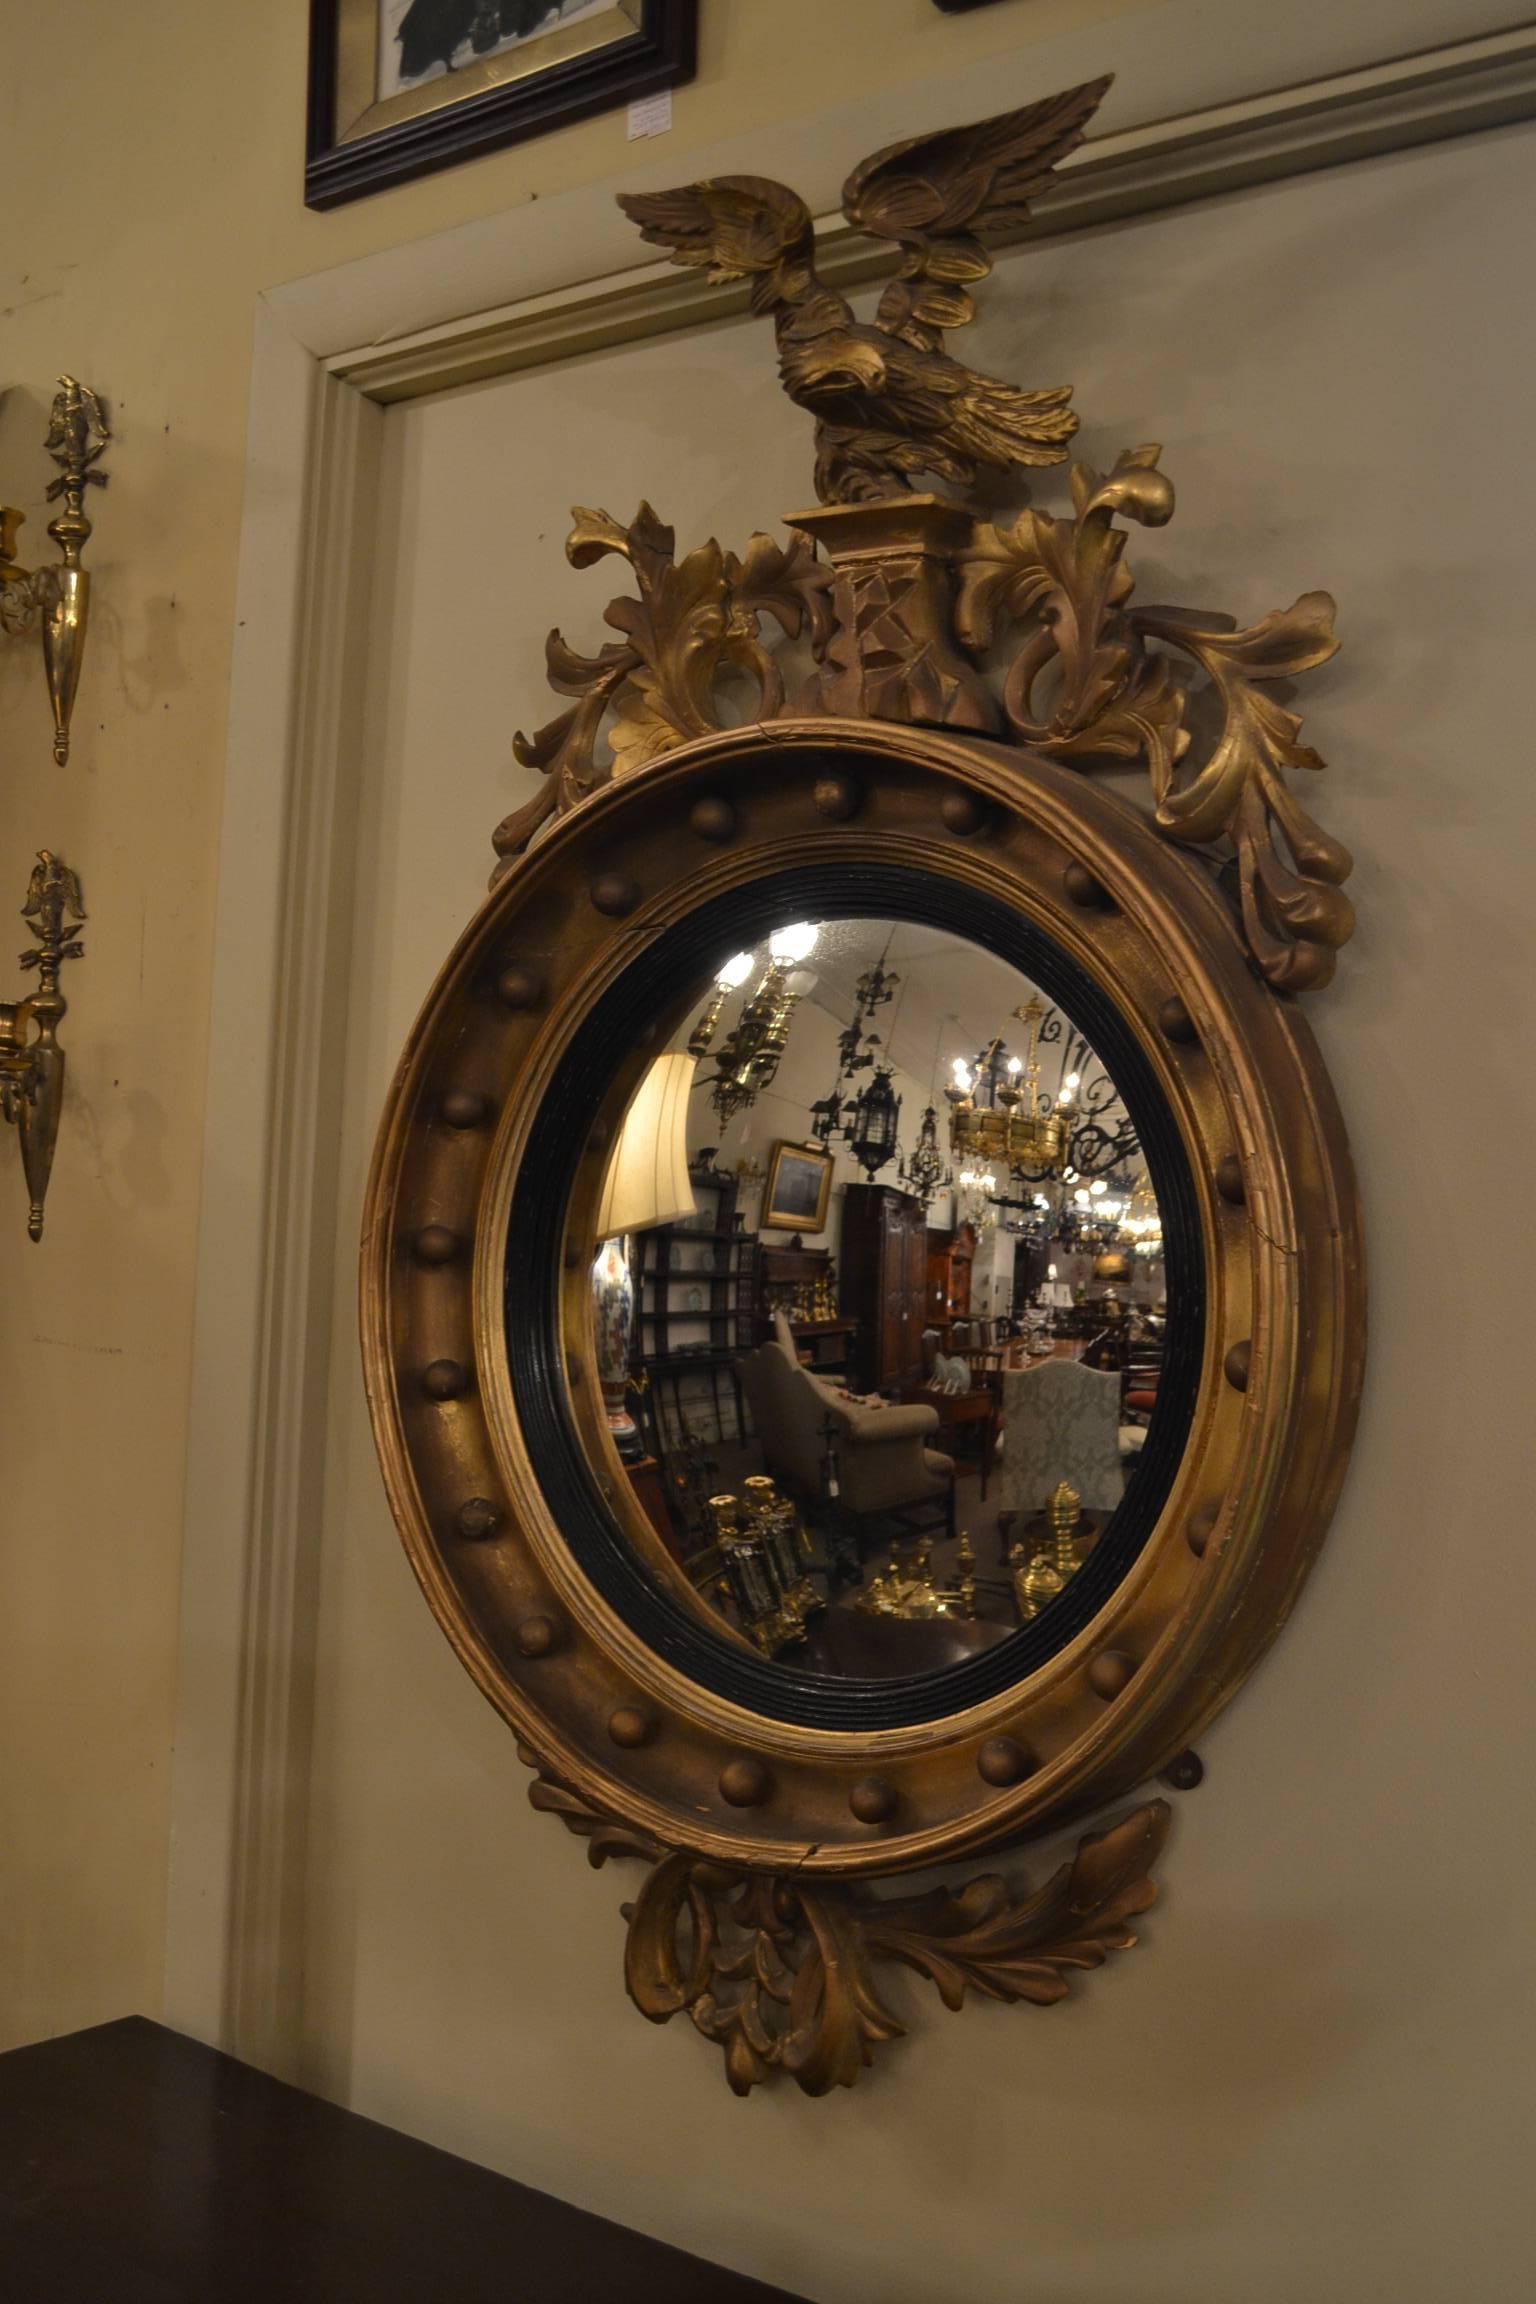 This lovely old mirror has its original gold leaf finish.